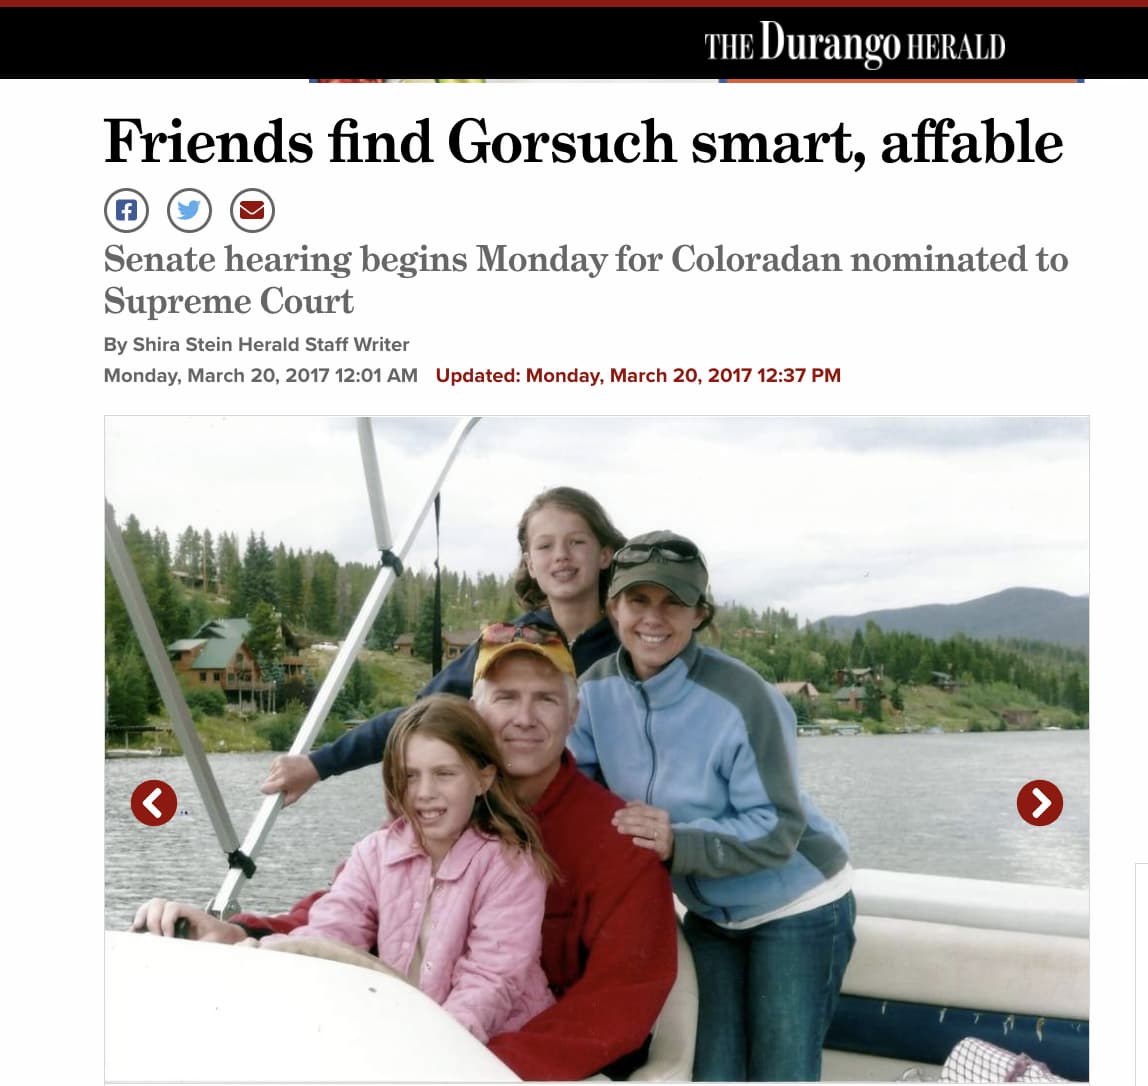 Neil Gorsuch and family in a boat